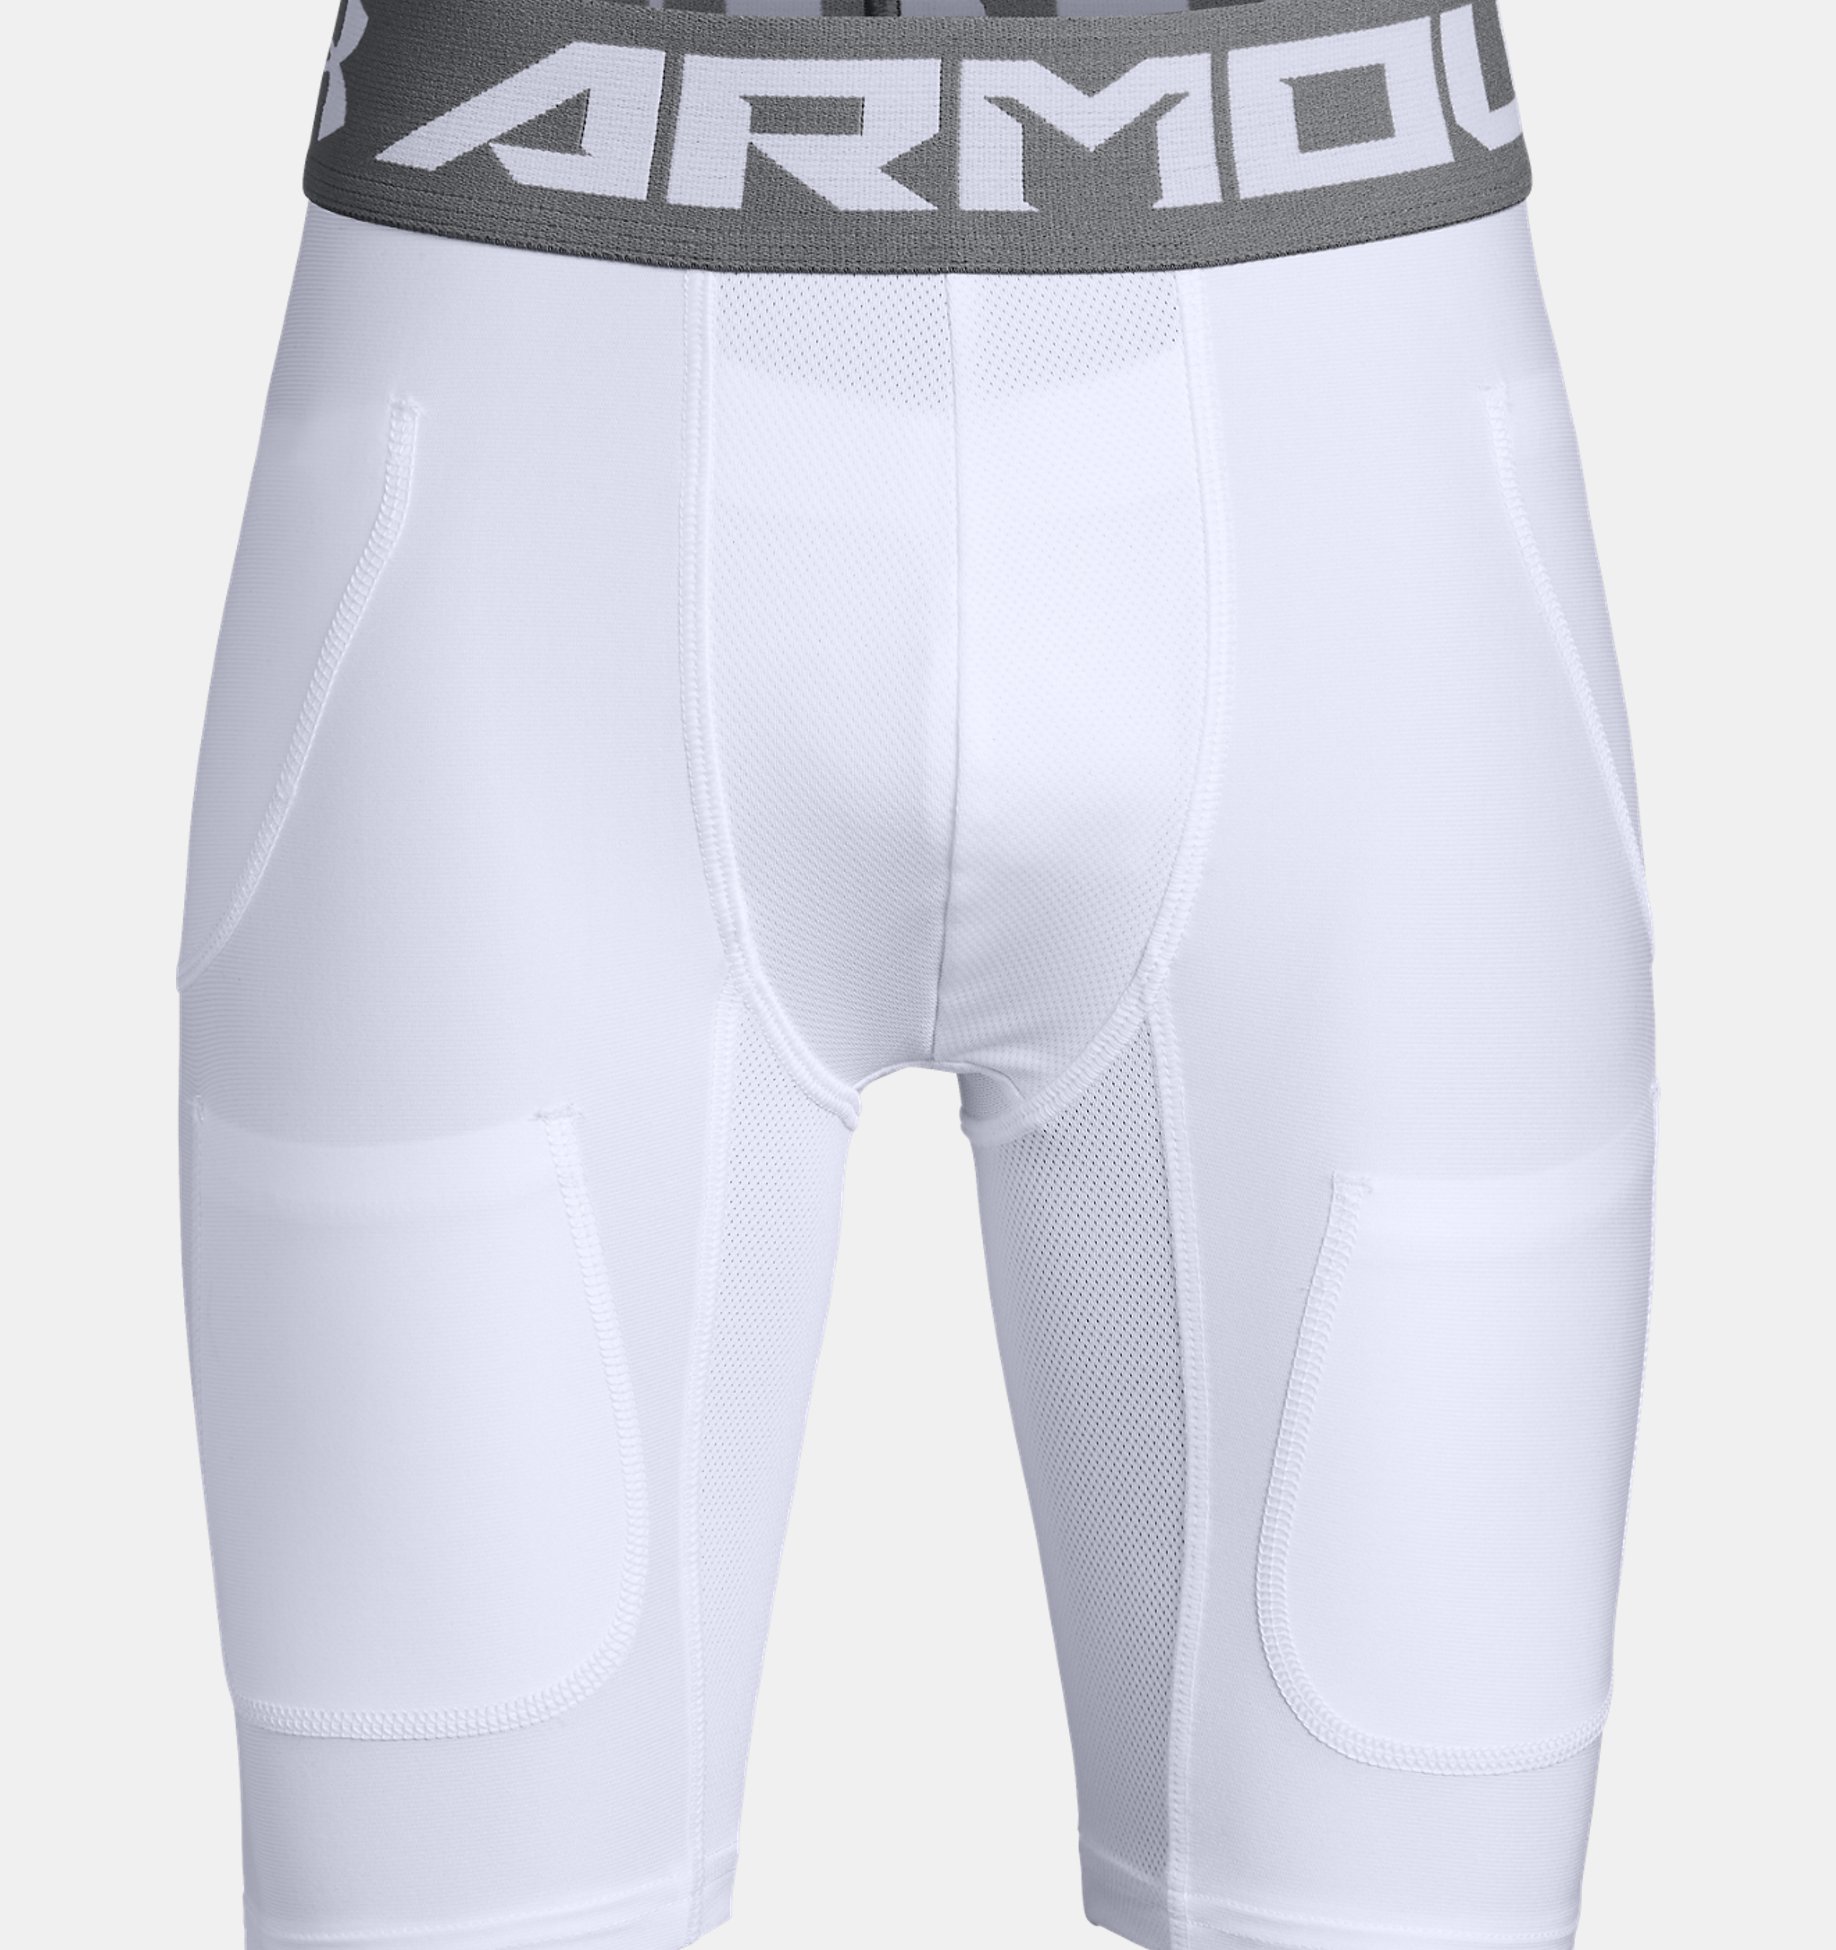 Under Armour Mens Gameday Armor Integrated Padded Football Girdle